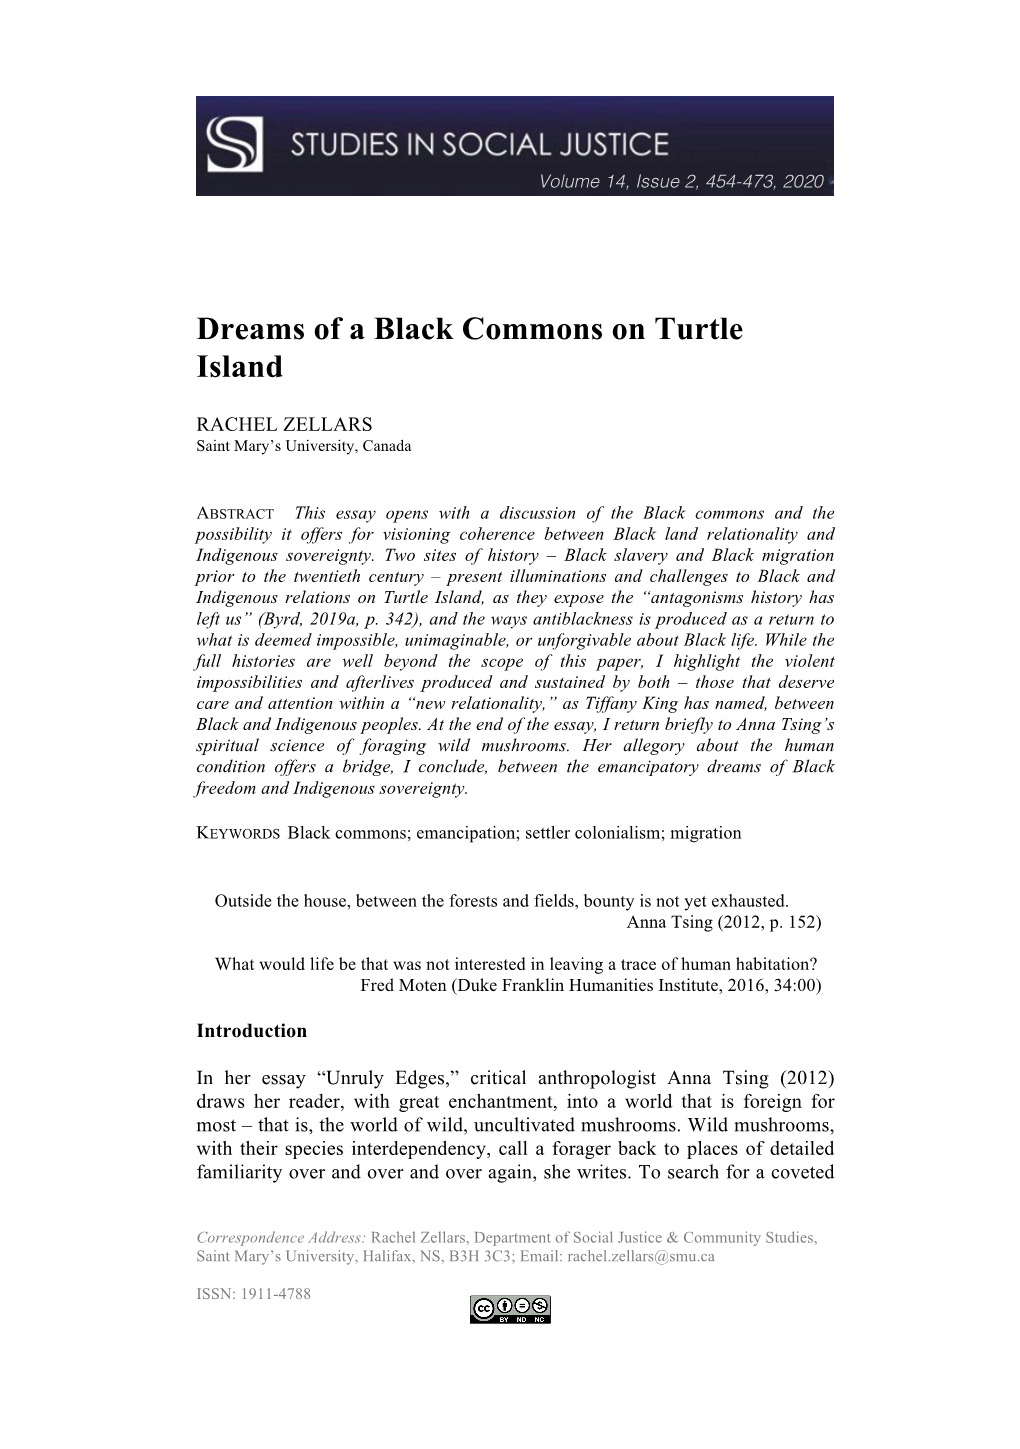 Dreams of a Black Commons on Turtle Island